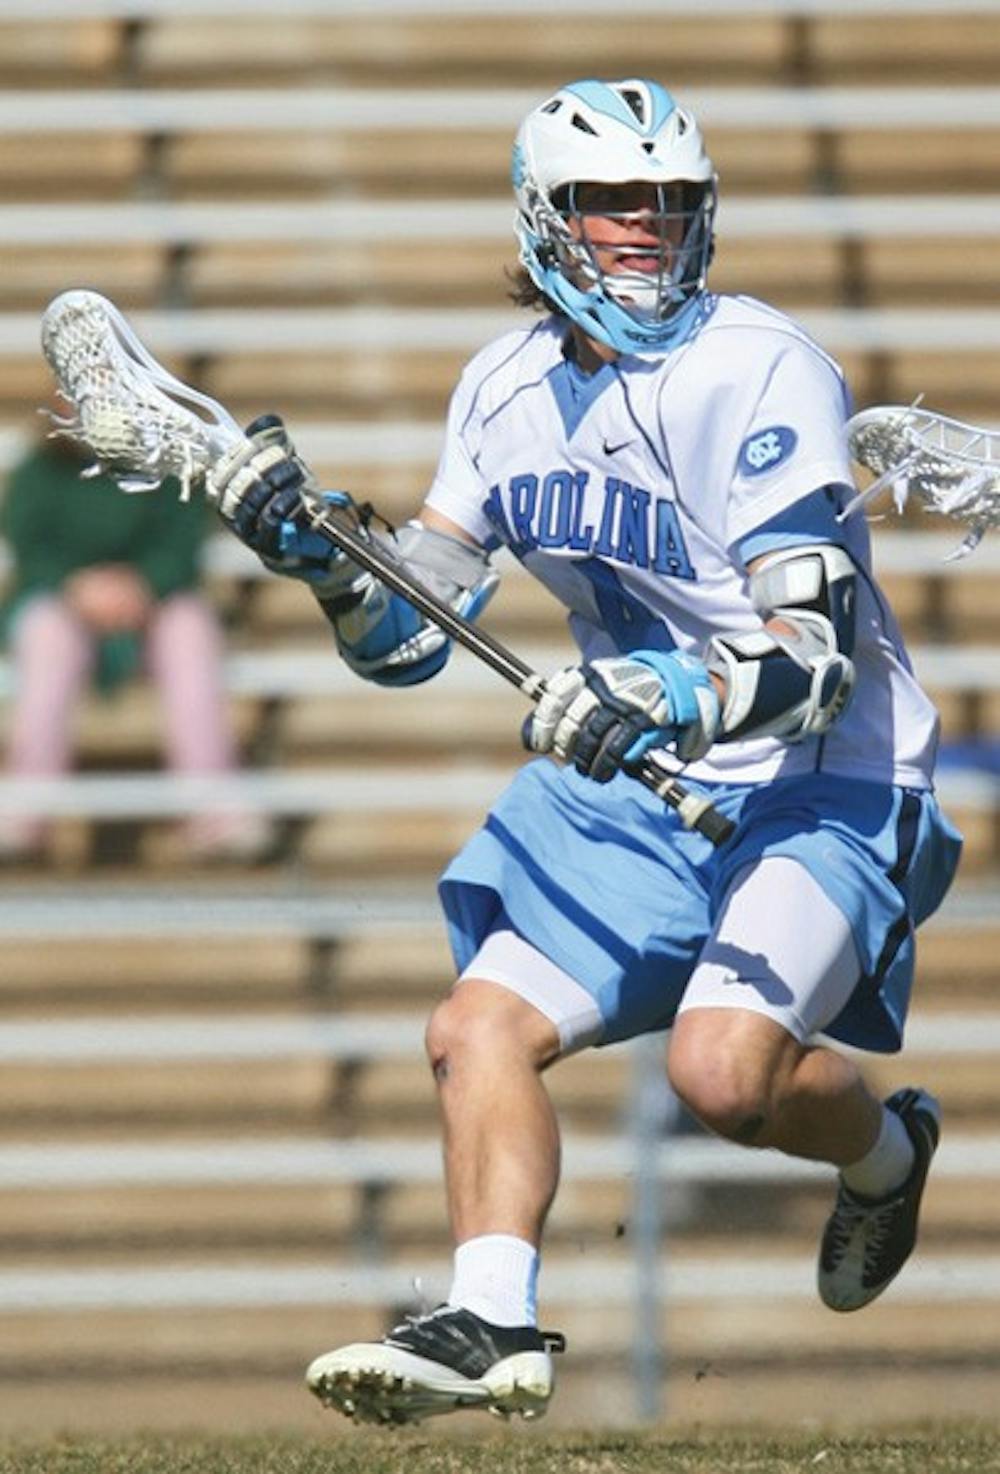 All-American Billy Bitter had a team-high six points against Lehigh. DTH/BJ Dworak